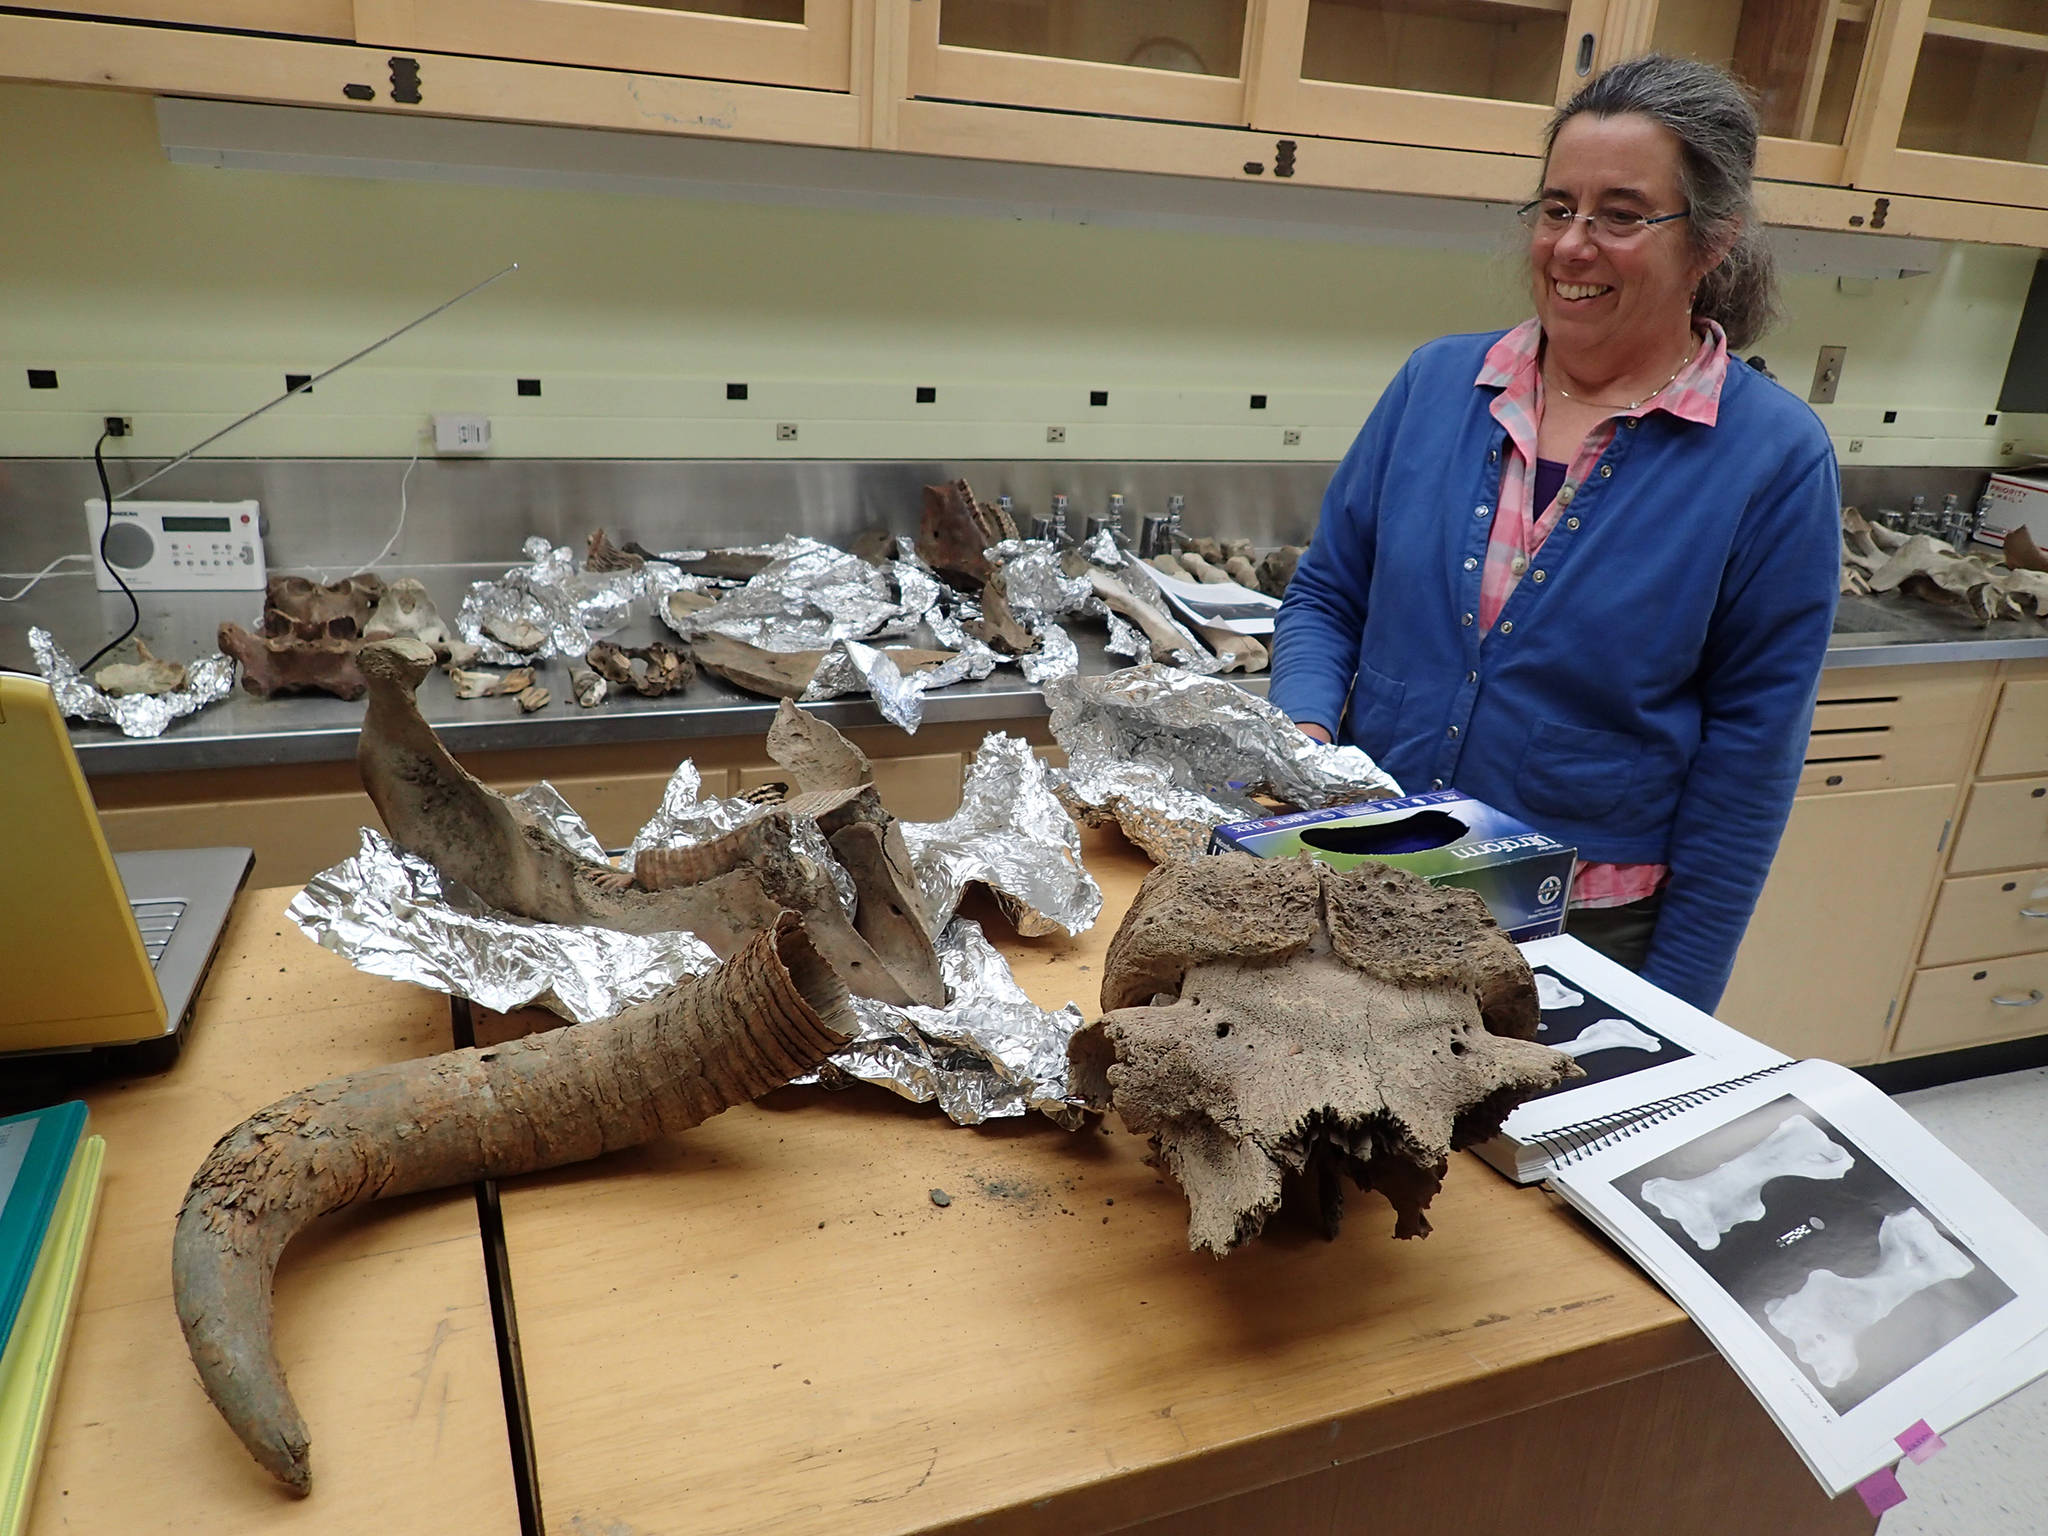 Pam Groves of the University of Alaska Fairbanks looks at bones of ancient creatures she has gathered over the years from northern rivers. The remains here include musk oxen, steppe bison and mammoth. (Courtesy Photo | Ned Rozell)